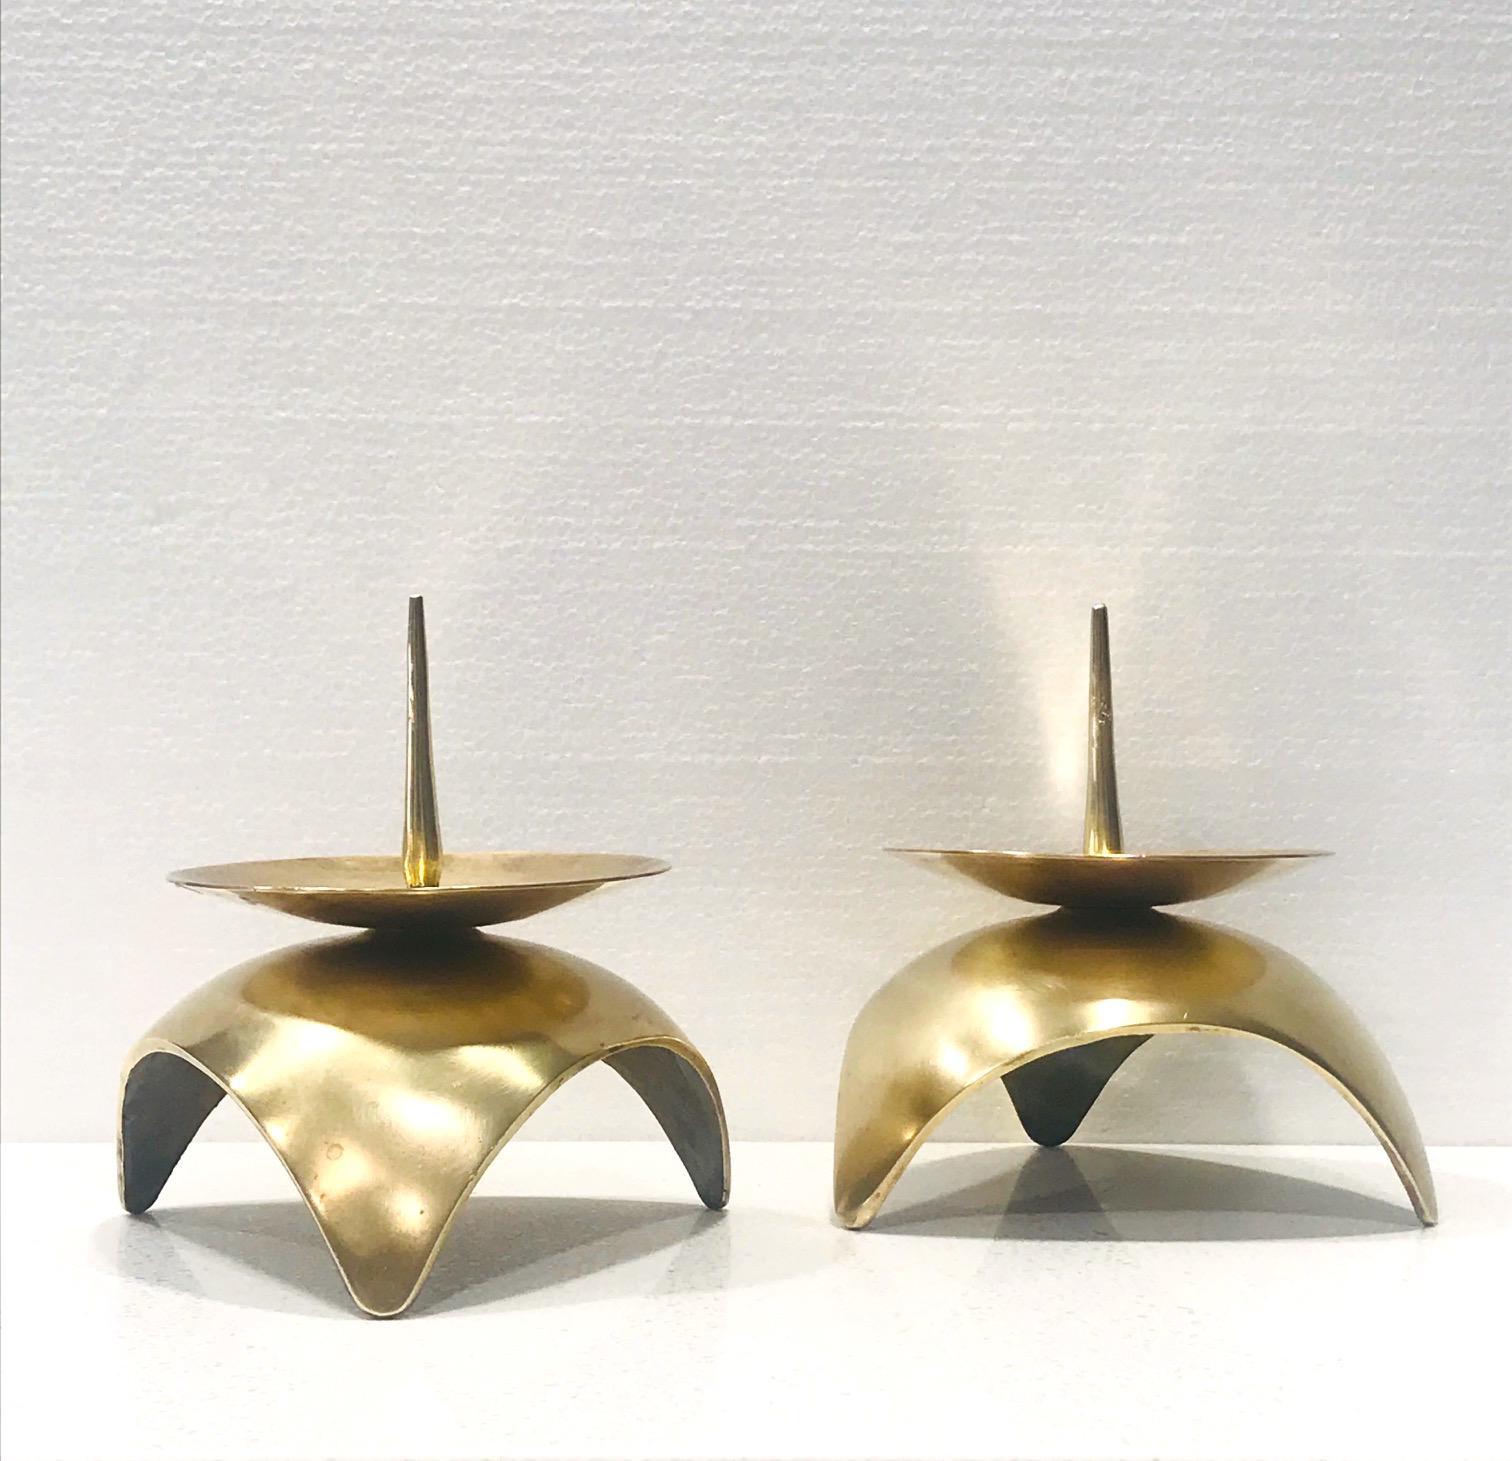 Pair of Japanese Mid-Century Modern candleholders in solid brass metal. Candlesticks have a Brutalist inspired design with spherical base and stylized spike and center dish. Ultra modern and gorgeous from all angles.